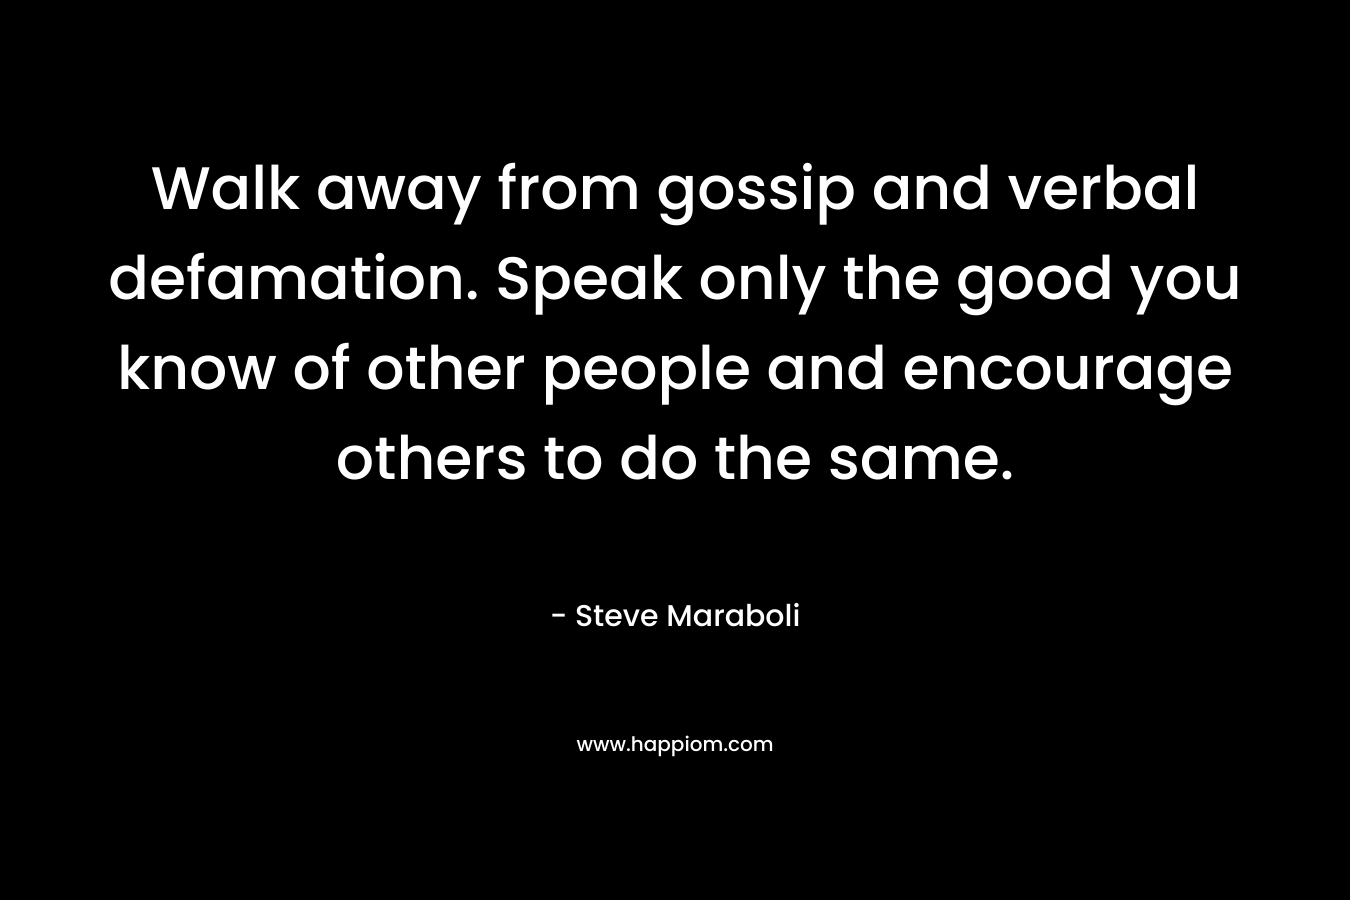 Walk away from gossip and verbal defamation. Speak only the good you know of other people and encourage others to do the same.